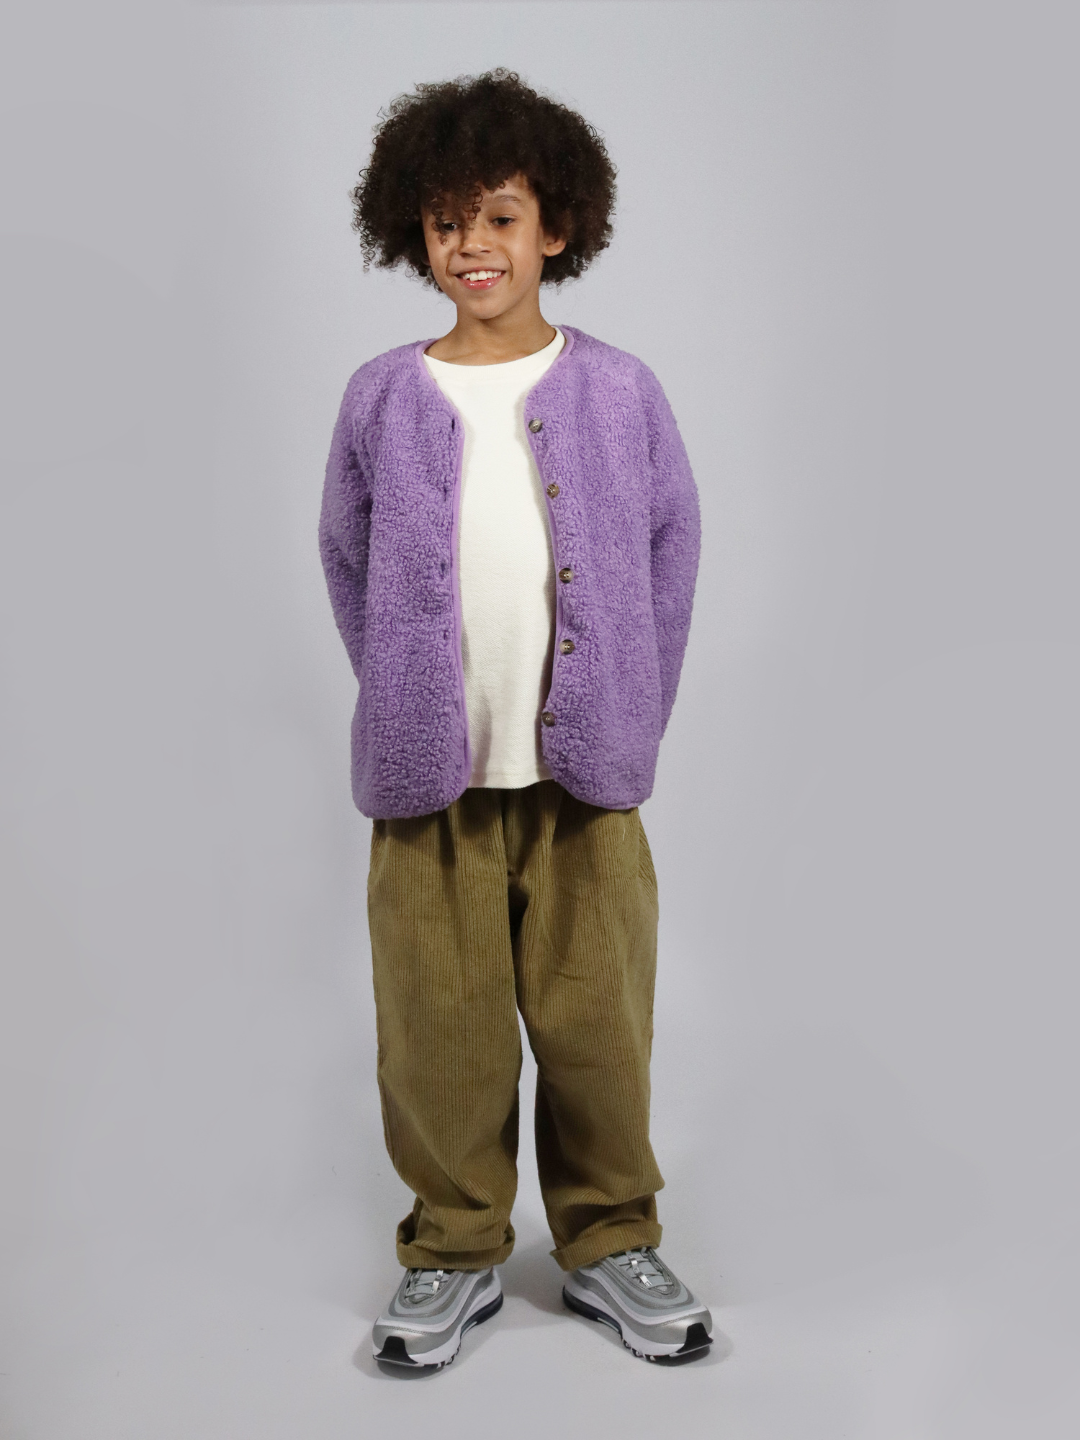 A child wearing a light purple collarless fleece jacket with four brown buttons, with olive green pants, a white t-shirt and grey sneakers, standing on a light grey background.